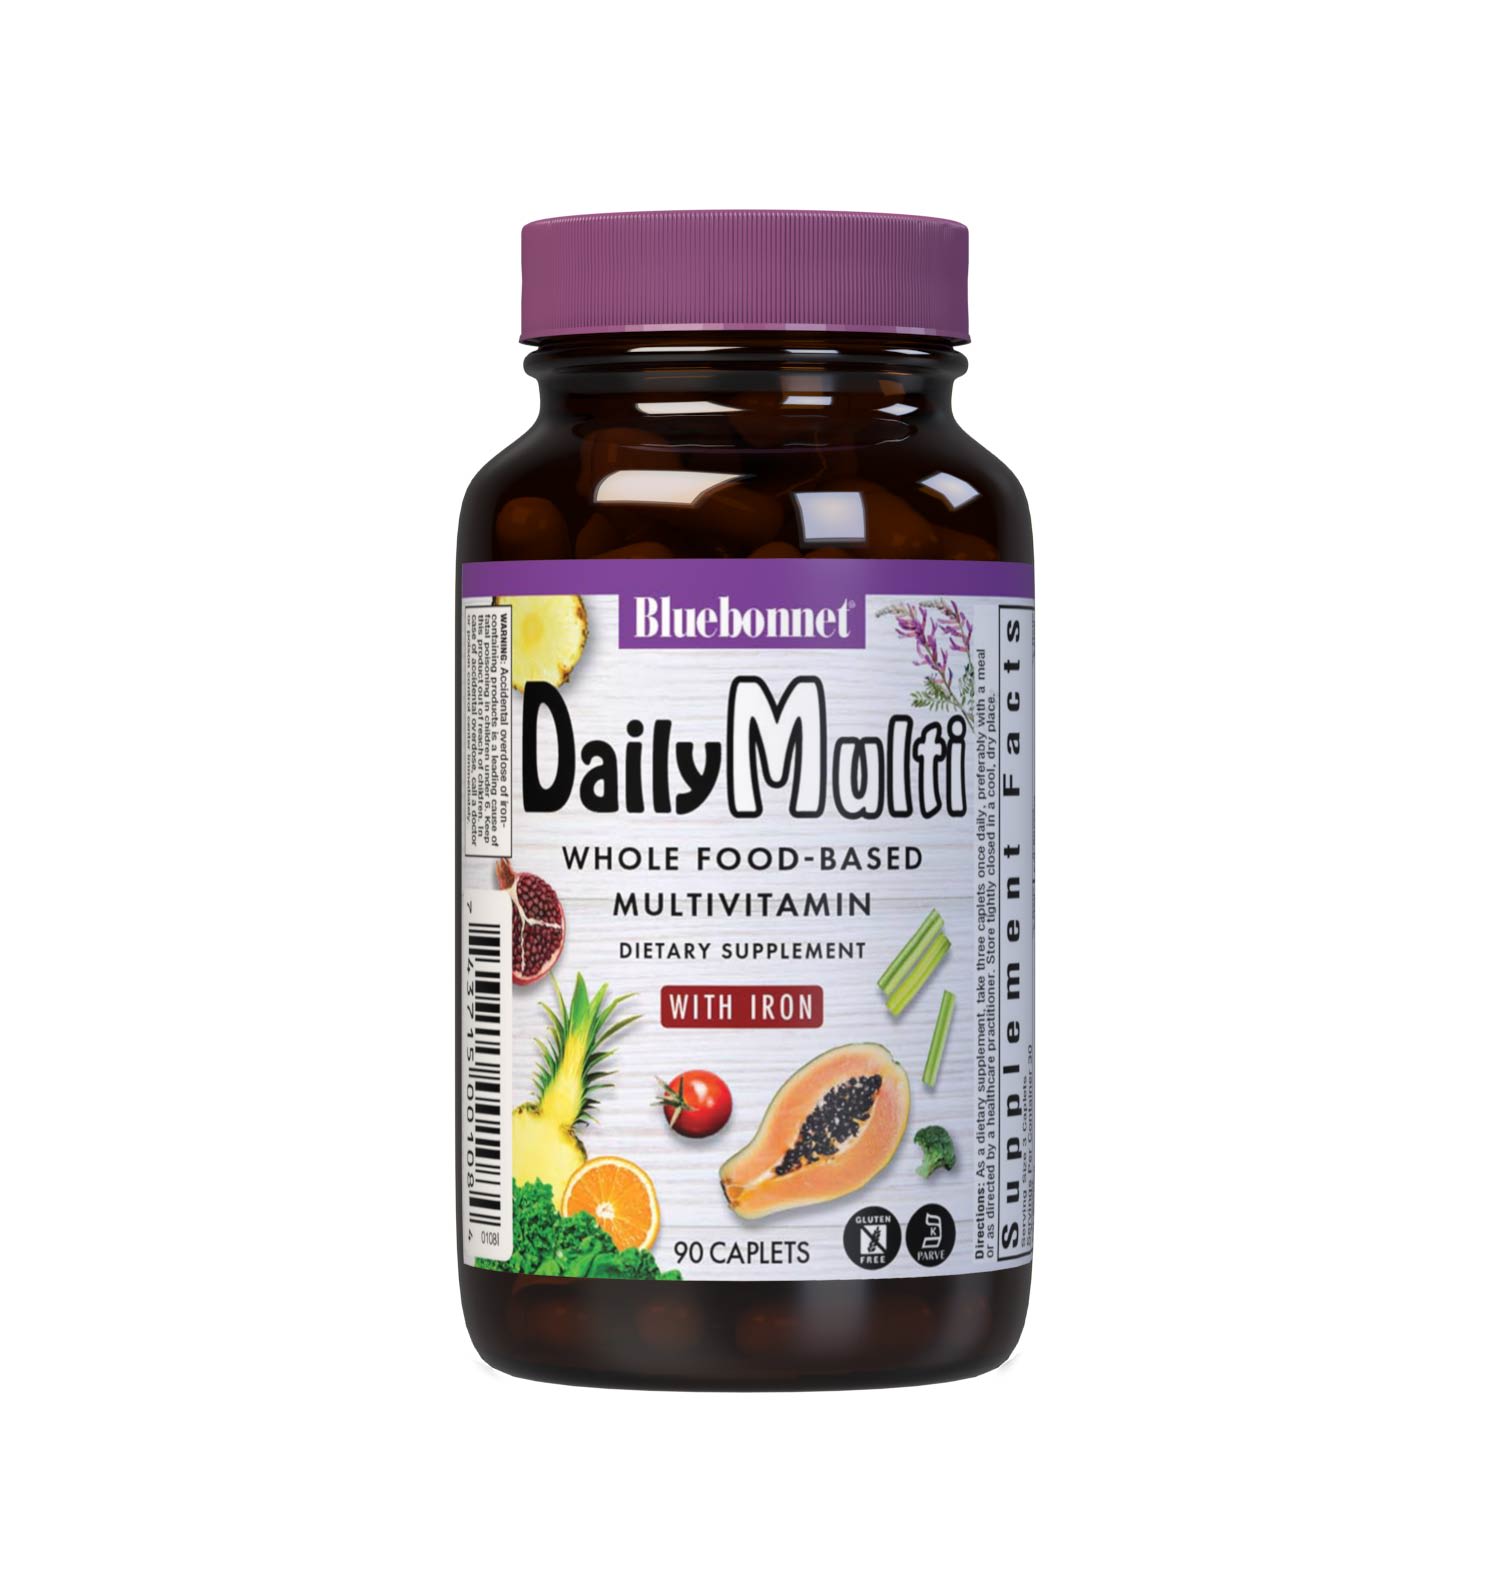 Bluebonnet’s DailyMulti Formula 90 caplets is a whole-food based multivitamin & multimineral dietary supplement that is gluten-free, enriched with super whole food concentrates, as well as providing a perfect blend of plant source nutrients, plant oils, herbs, vitamins, minerals, antioxidants, enzymes and a phytonutrient sprout blend. #size_90 count 